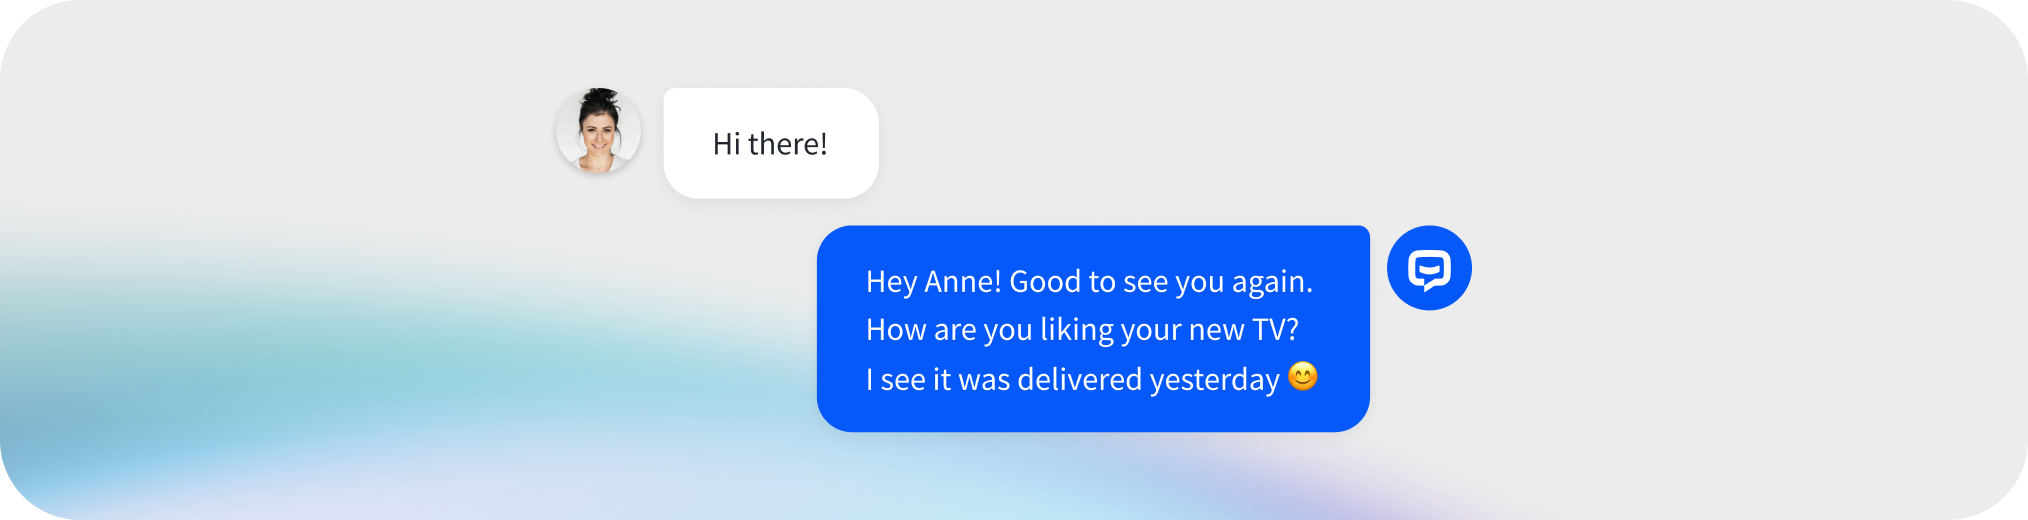 Chatbots that exceed expectations